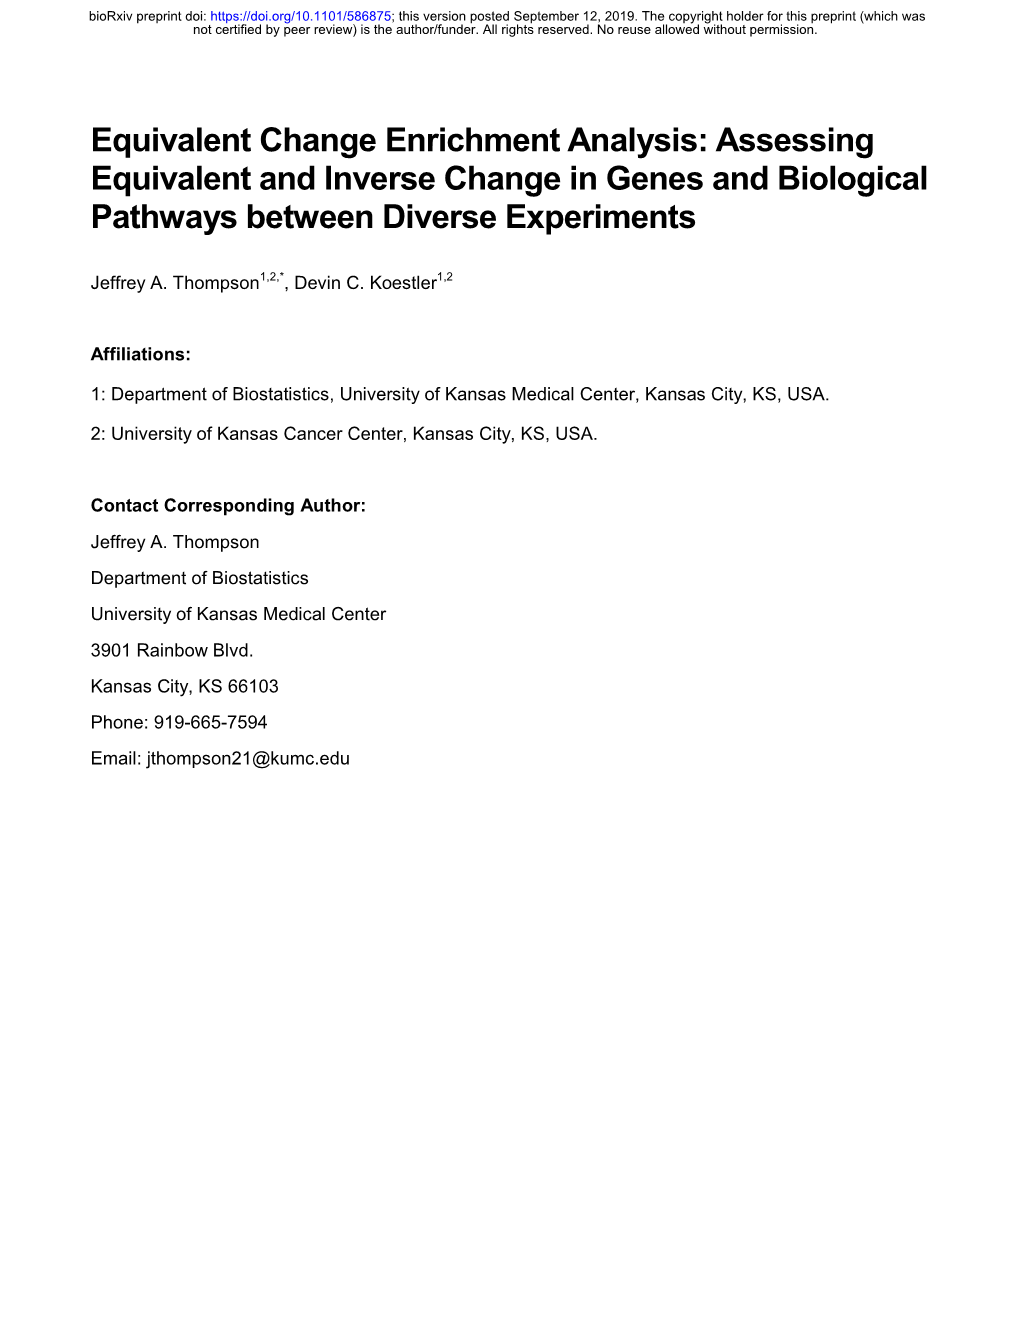 Assessing Equivalent and Inverse Change in Genes and Biological Pathways Between Diverse Experiments